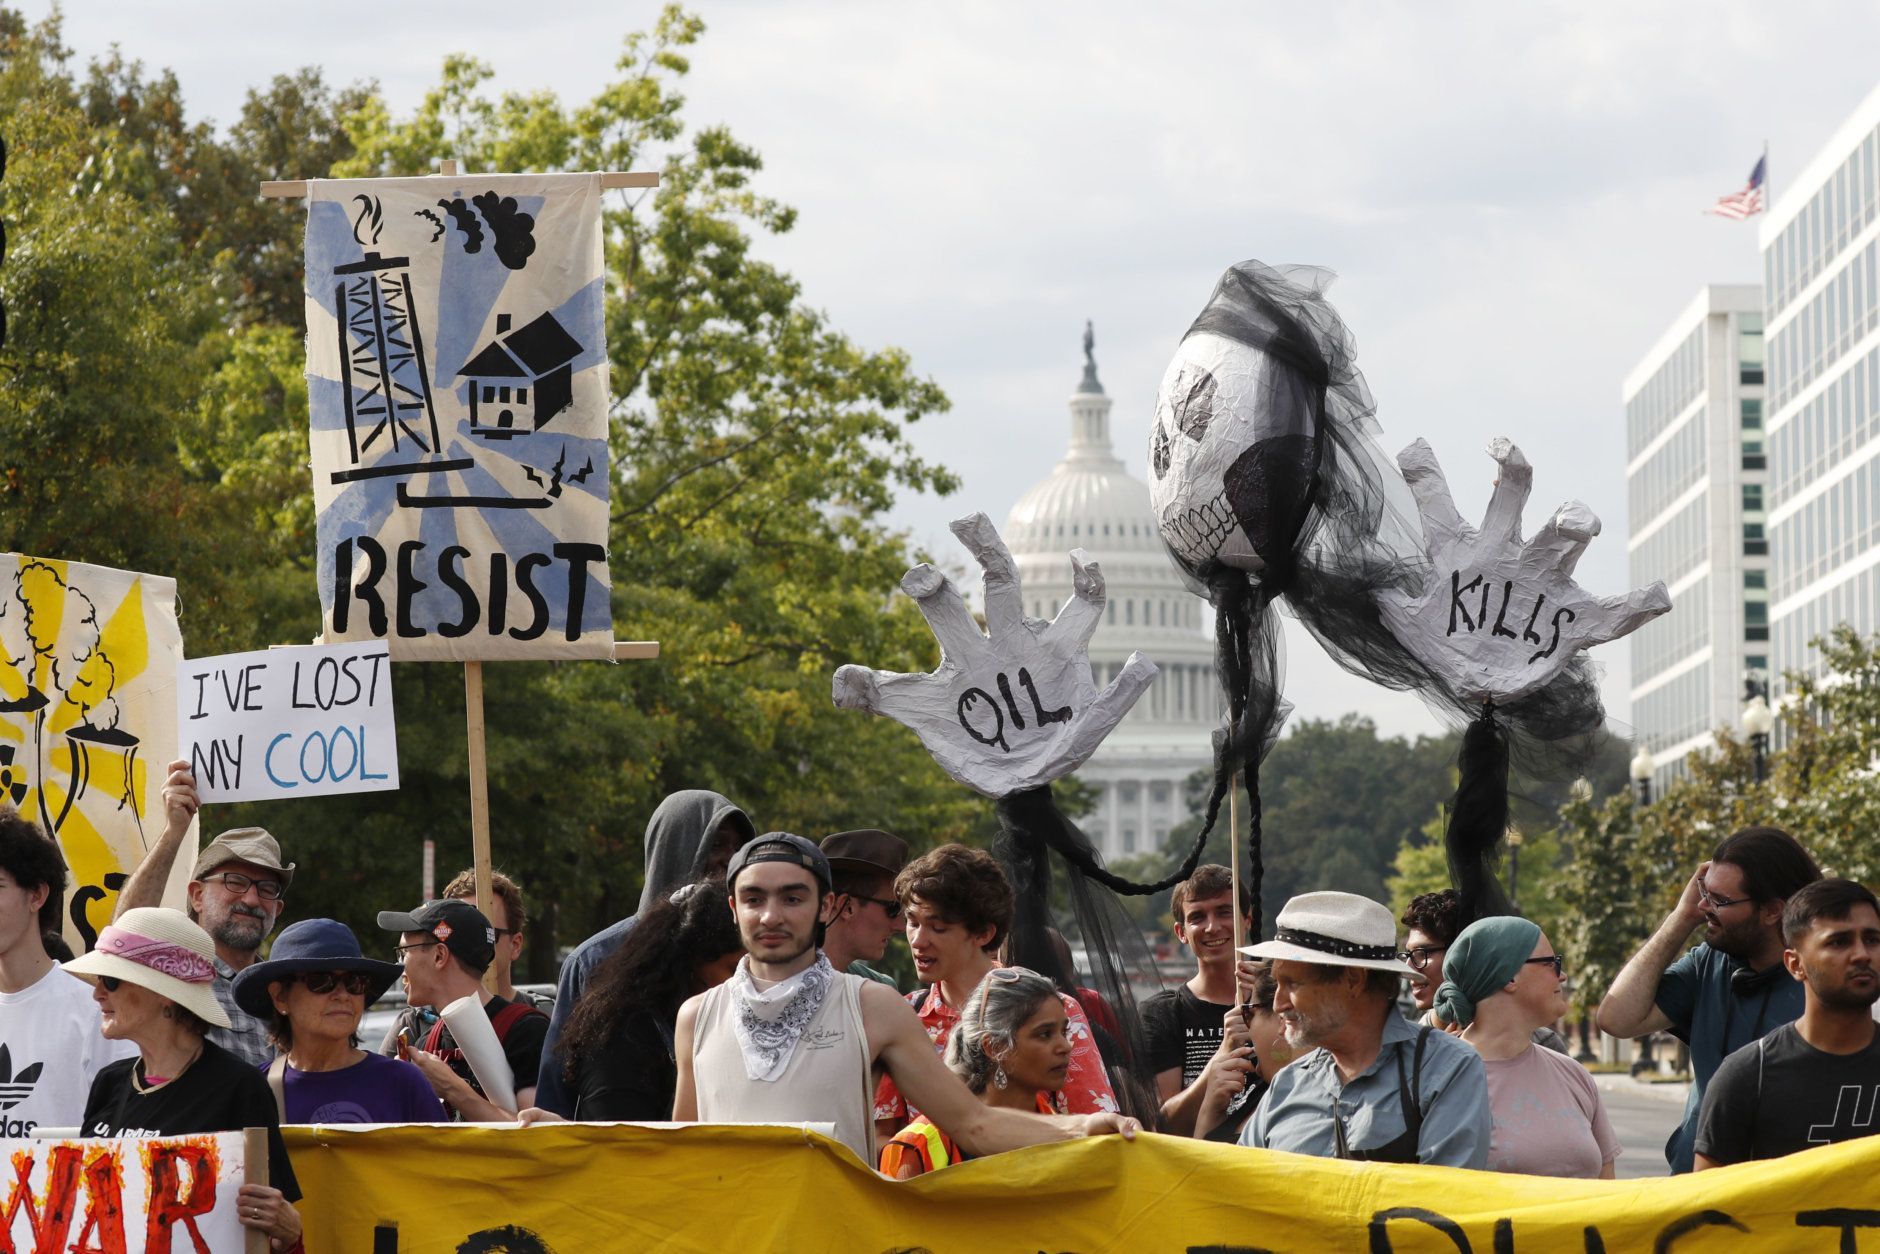 Protesters block traffic near the U.S. Capitol in Washington, Monday, Sept. 23, 2019. A broad coalition of climate and social justice organizations are disrupting the morning rush hour commute. (AP Photo/Pablo Martinez Monsivais)